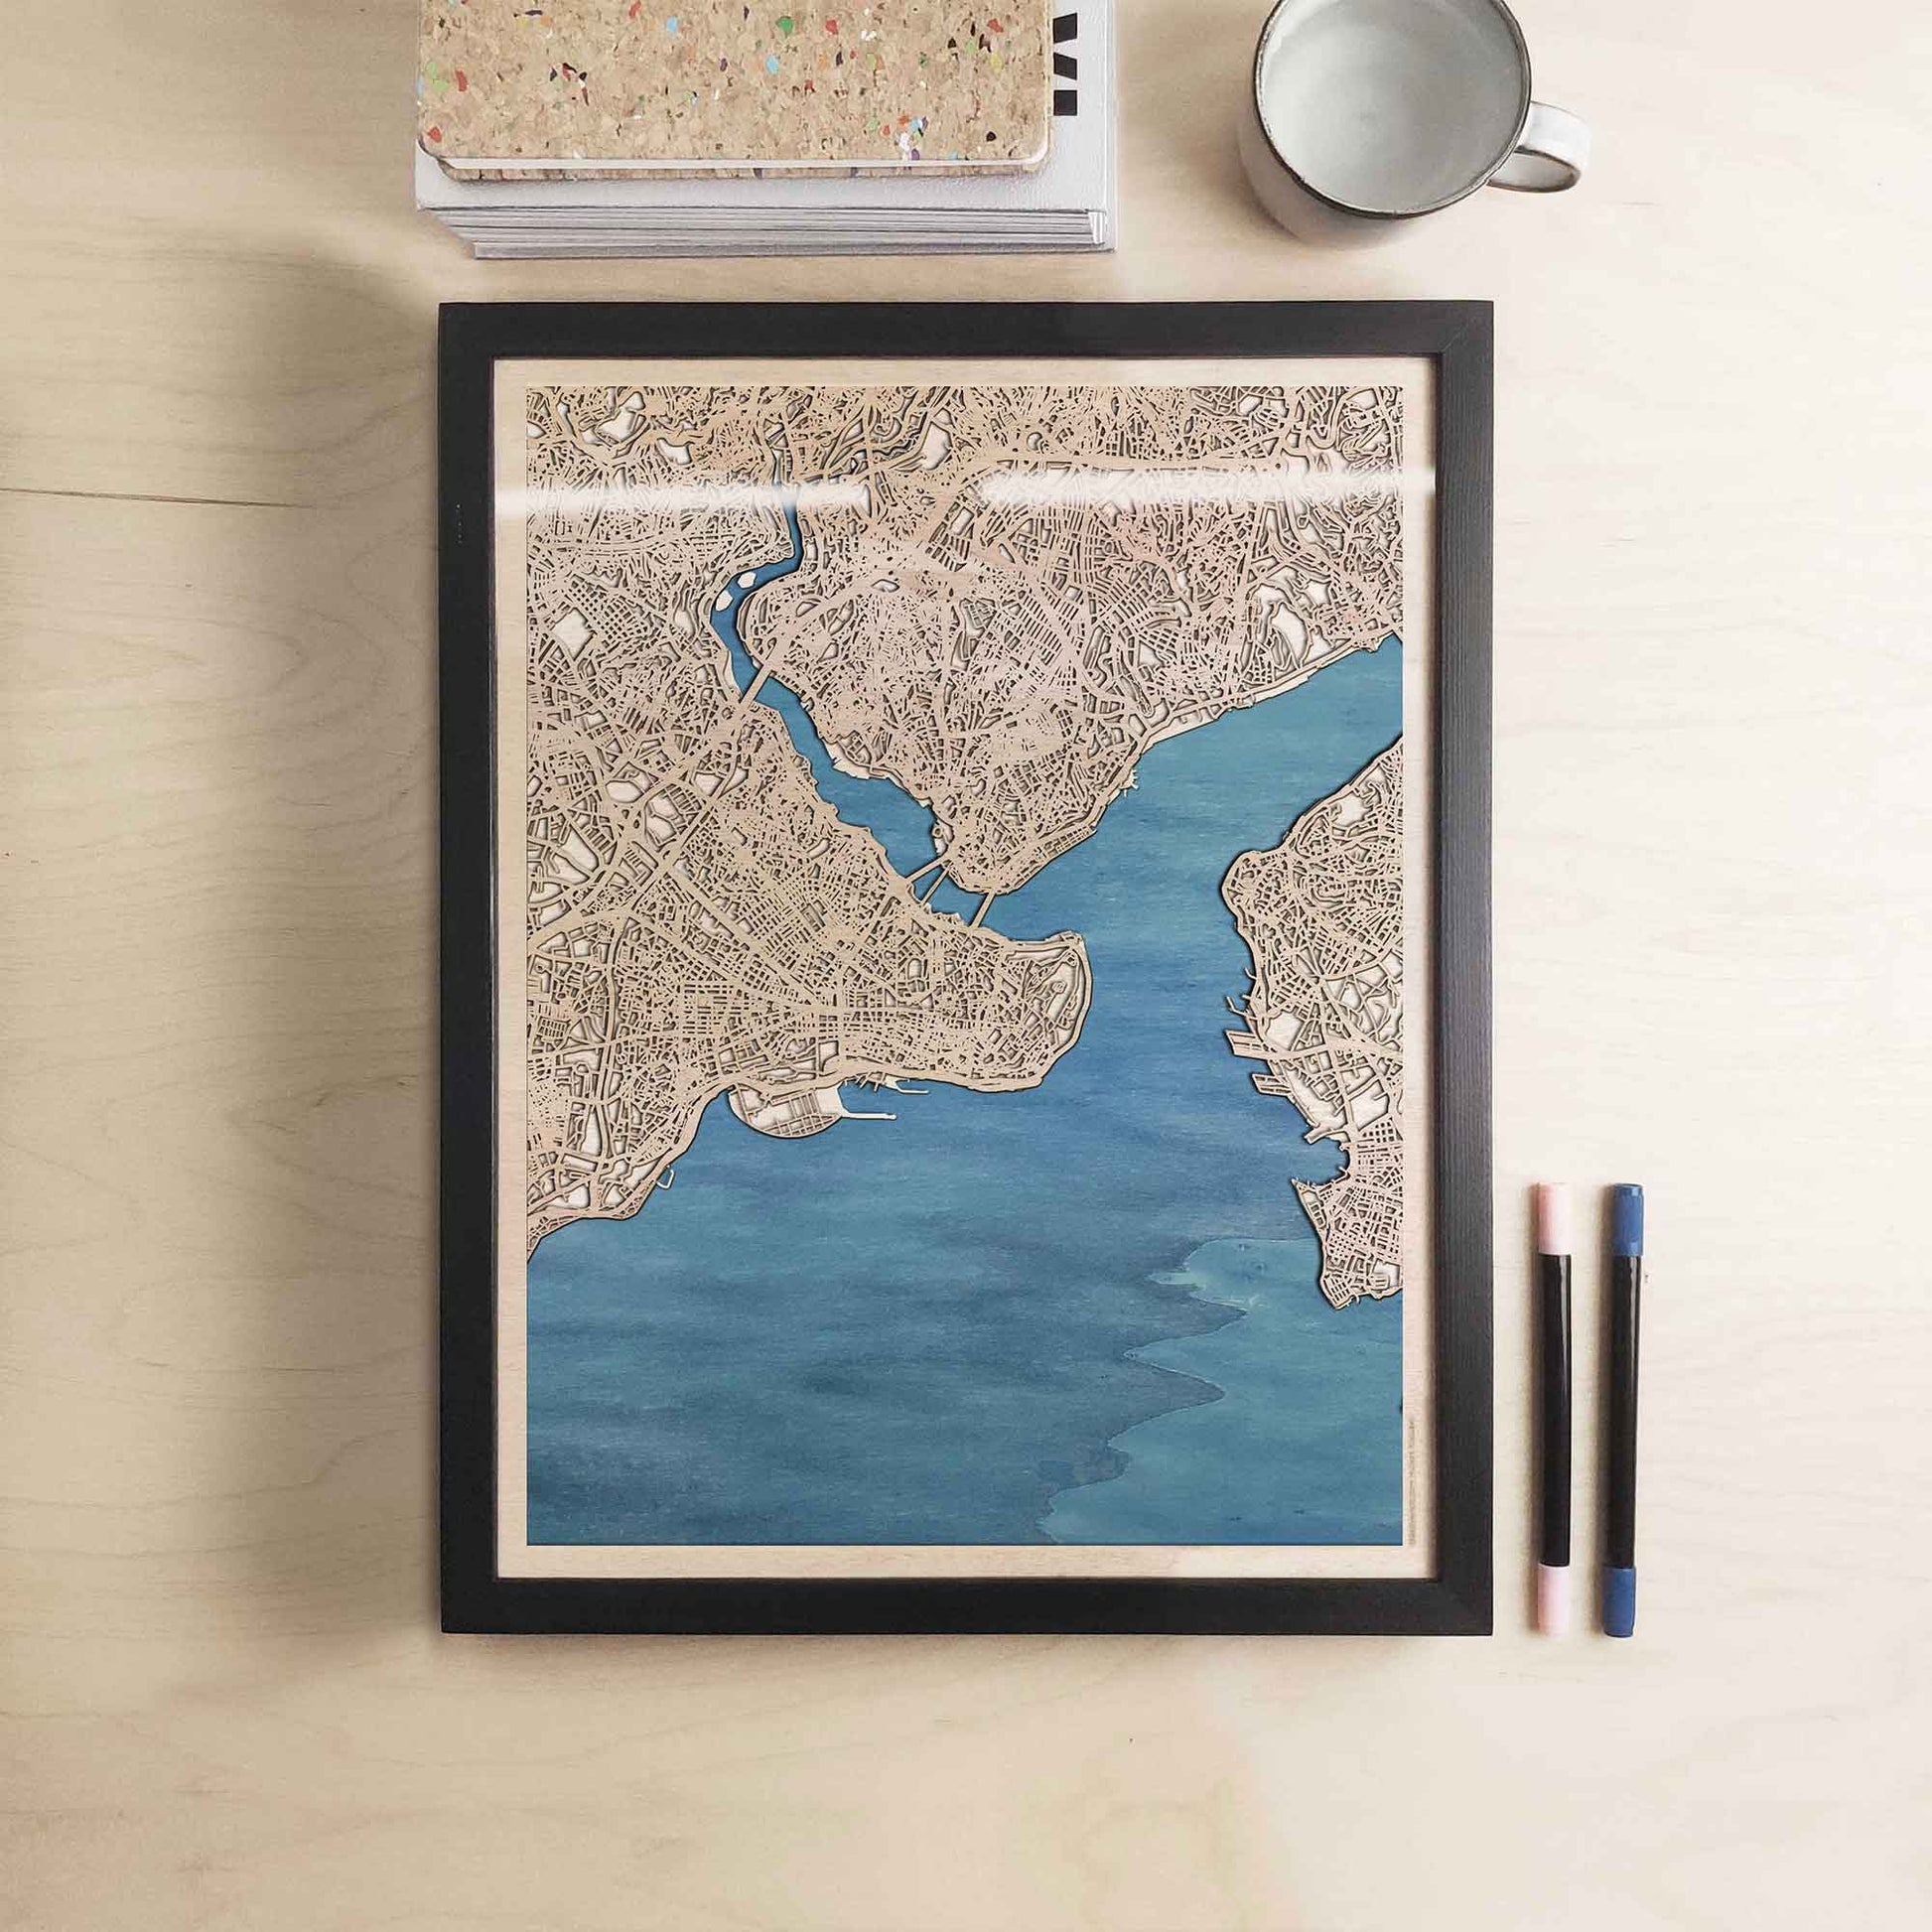 Istanbul Wooden Map by CityWood - Custom Wood Map Art - Unique Laser Cut Engraved - Anniversary Gift